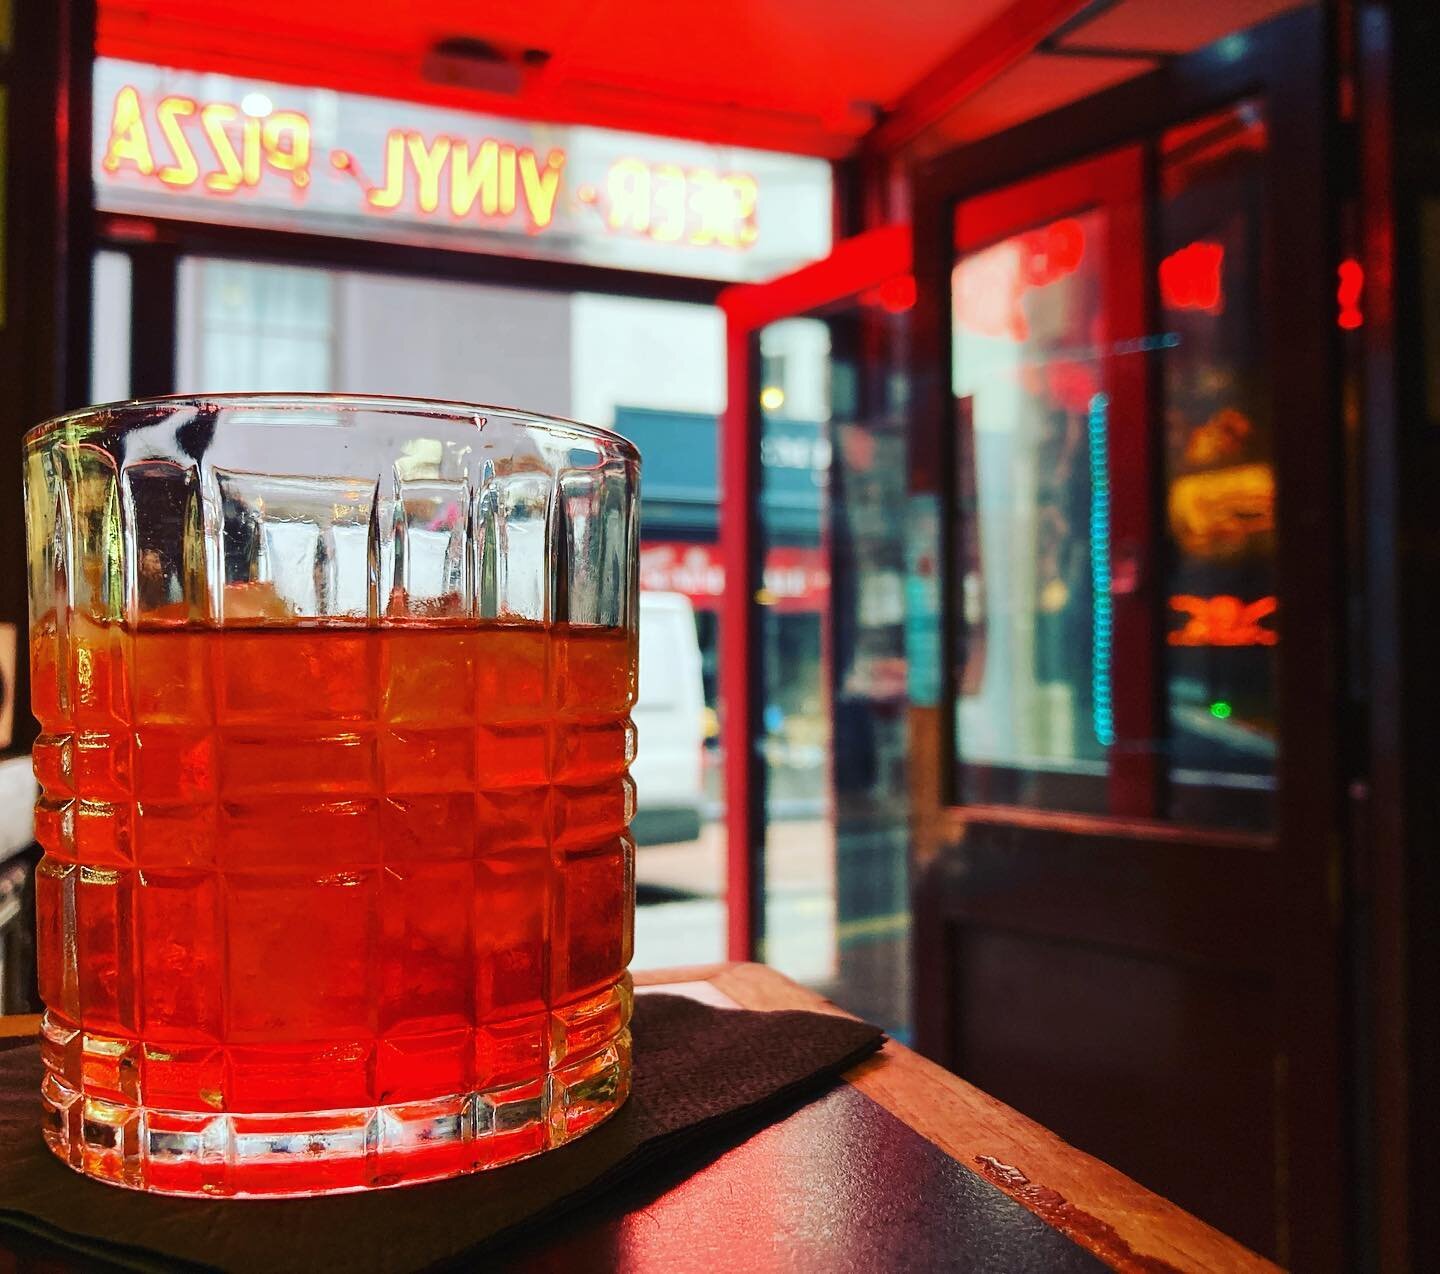 The Stonewall Spark: Mango &amp; Passionfruit @stonewallspirits_ Gin, Aperol &amp; Sweet Vermouth. A sweeter, fruity take on the classic Negroni 🍸